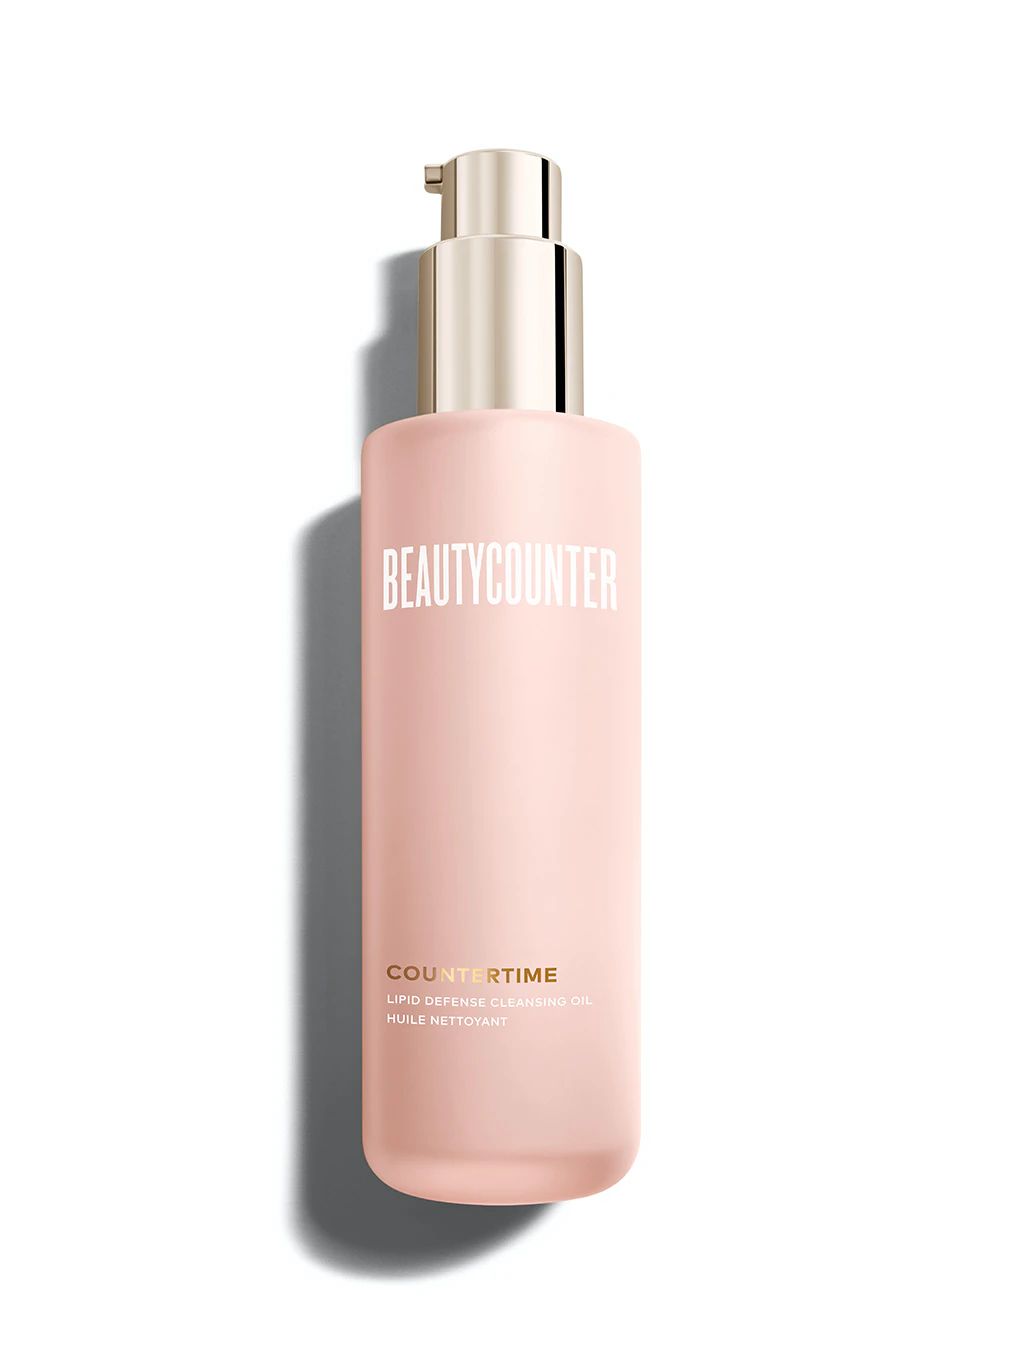 Countertime Lipid Defense Cleansing Oil | Beautycounter.com